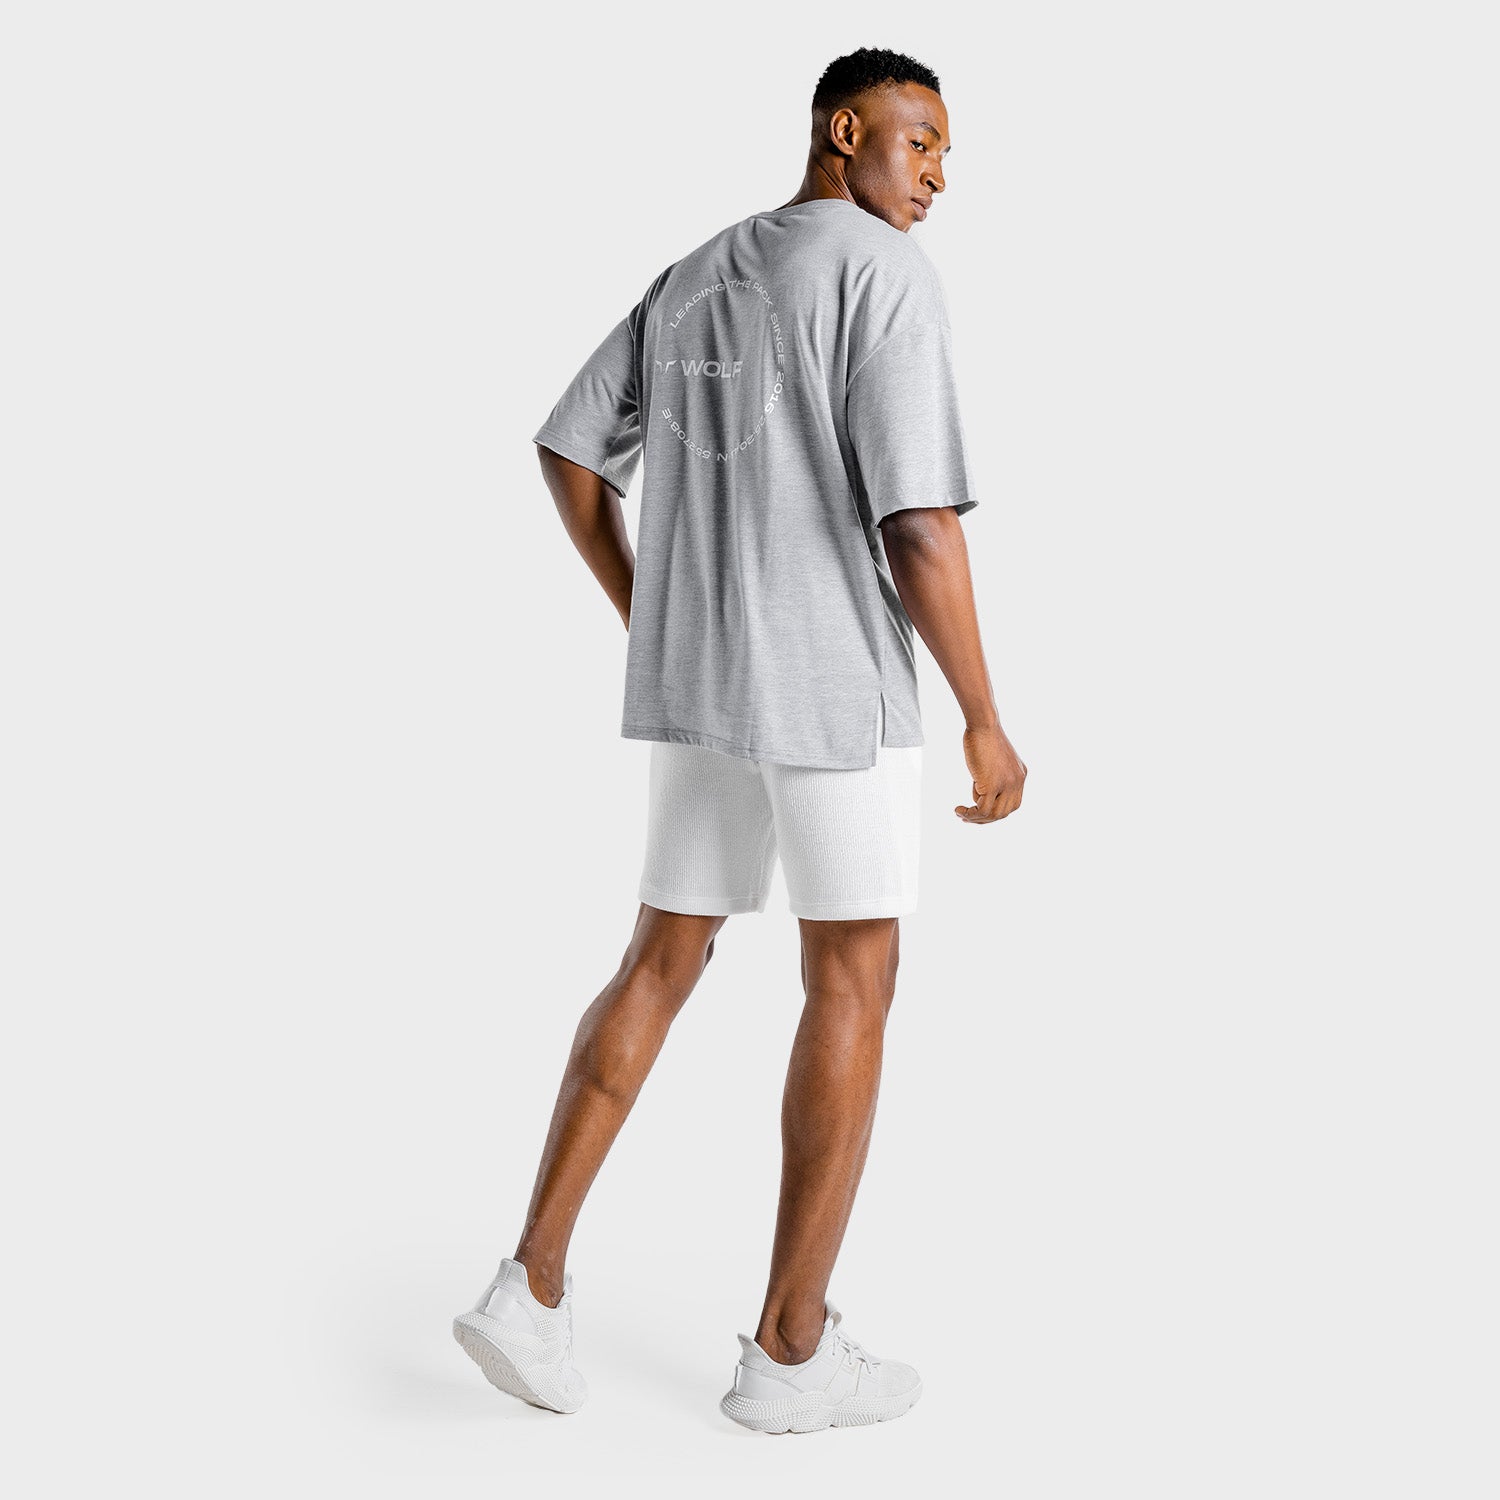 squatwolf-workout-shirts-for-men-luxe-oversize-tee-marl-gym-wear